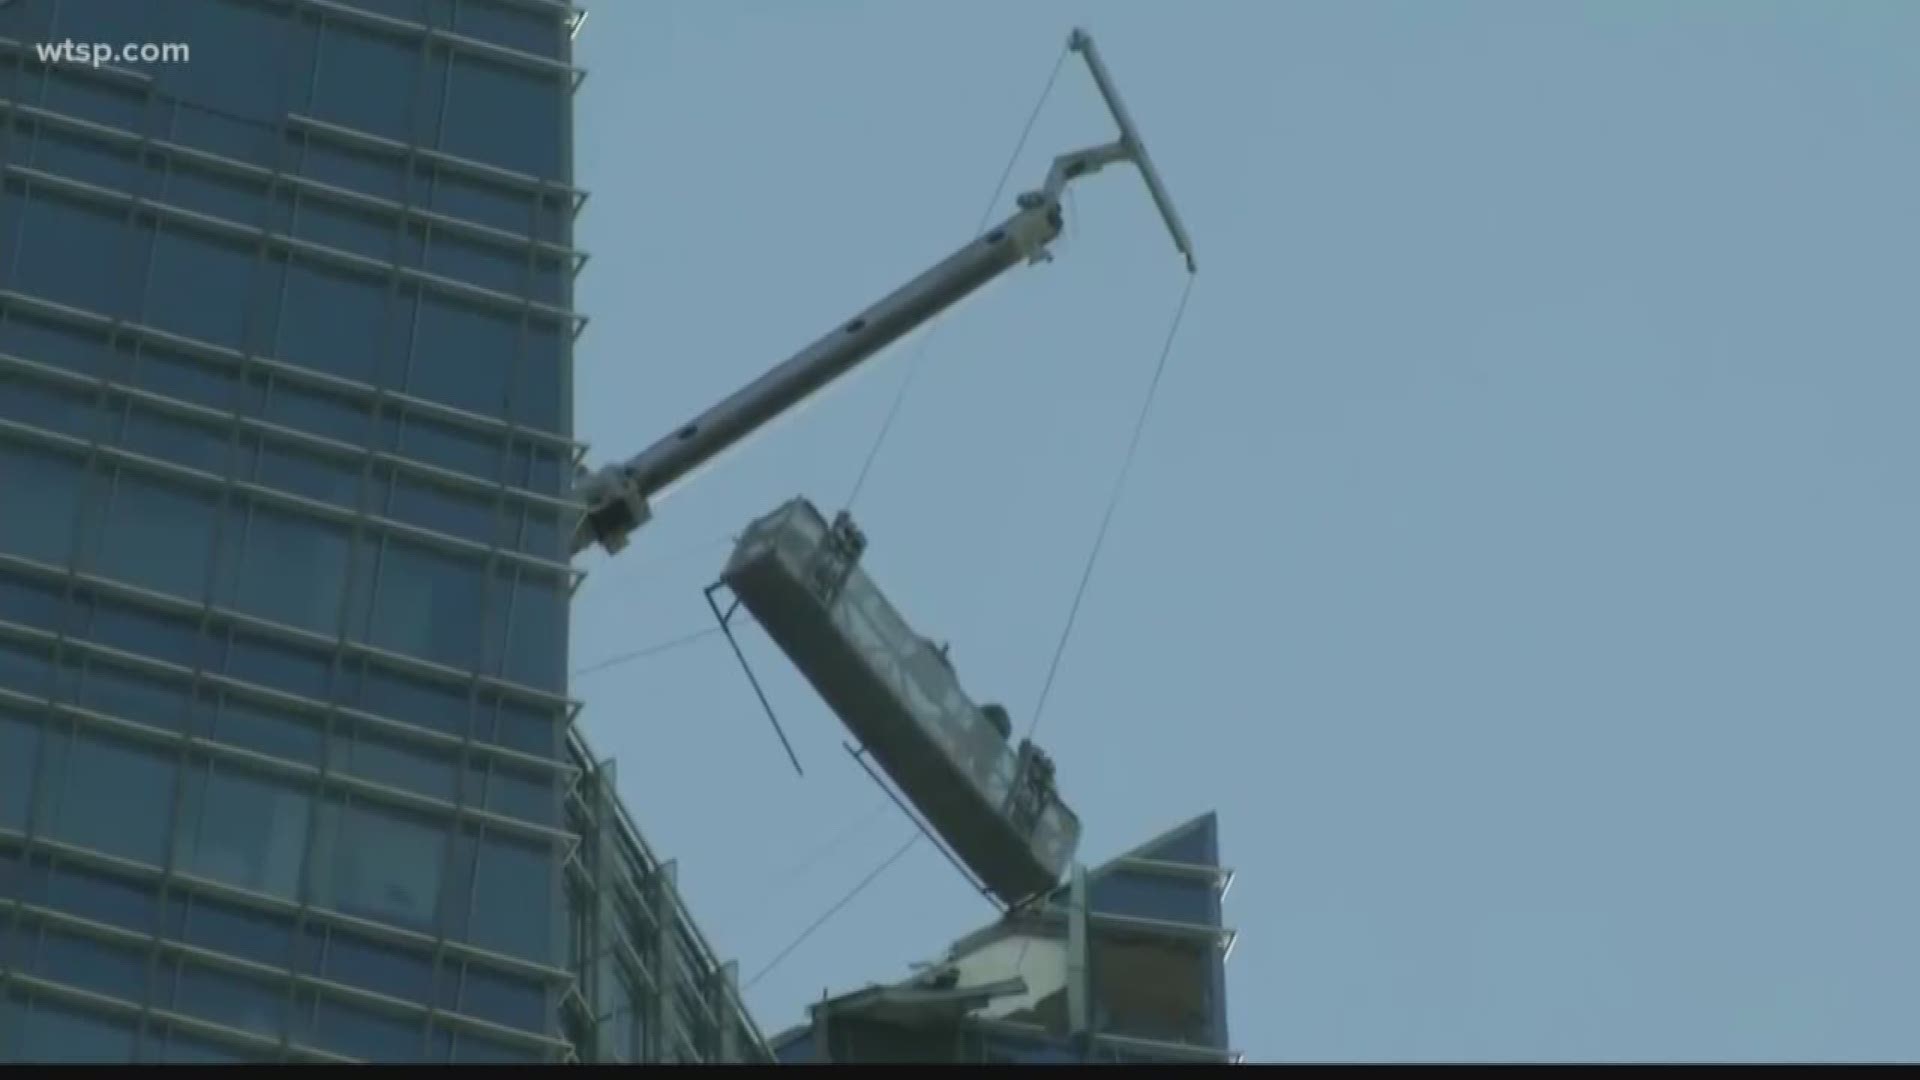 The workers were stuck on a swinging lift on the top of an Oklahoma City skyscraper. Also, terrifying video shows a helicopter spinning into the Hudson River.